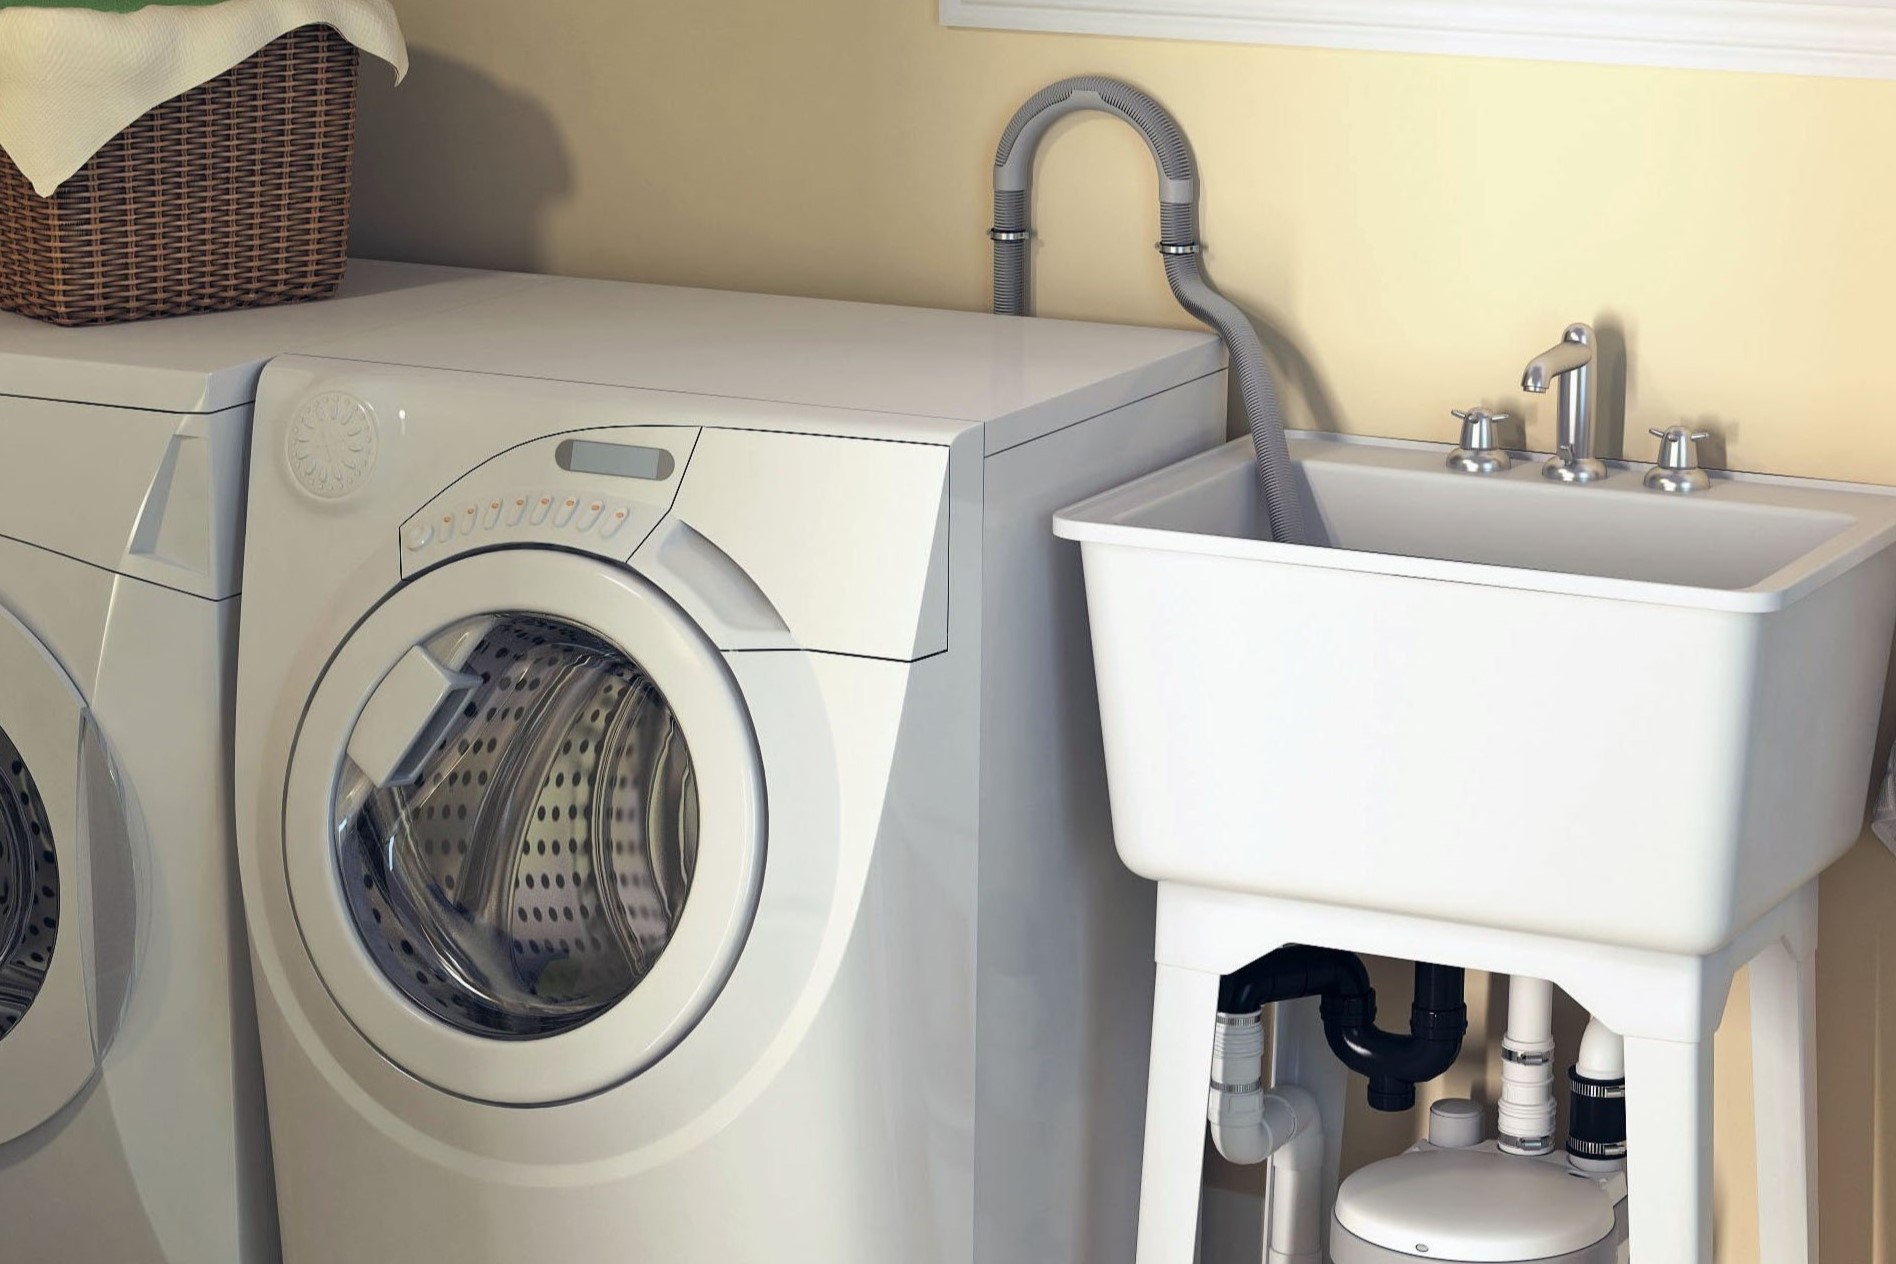 How To Connect A Washing Machine To A Sink